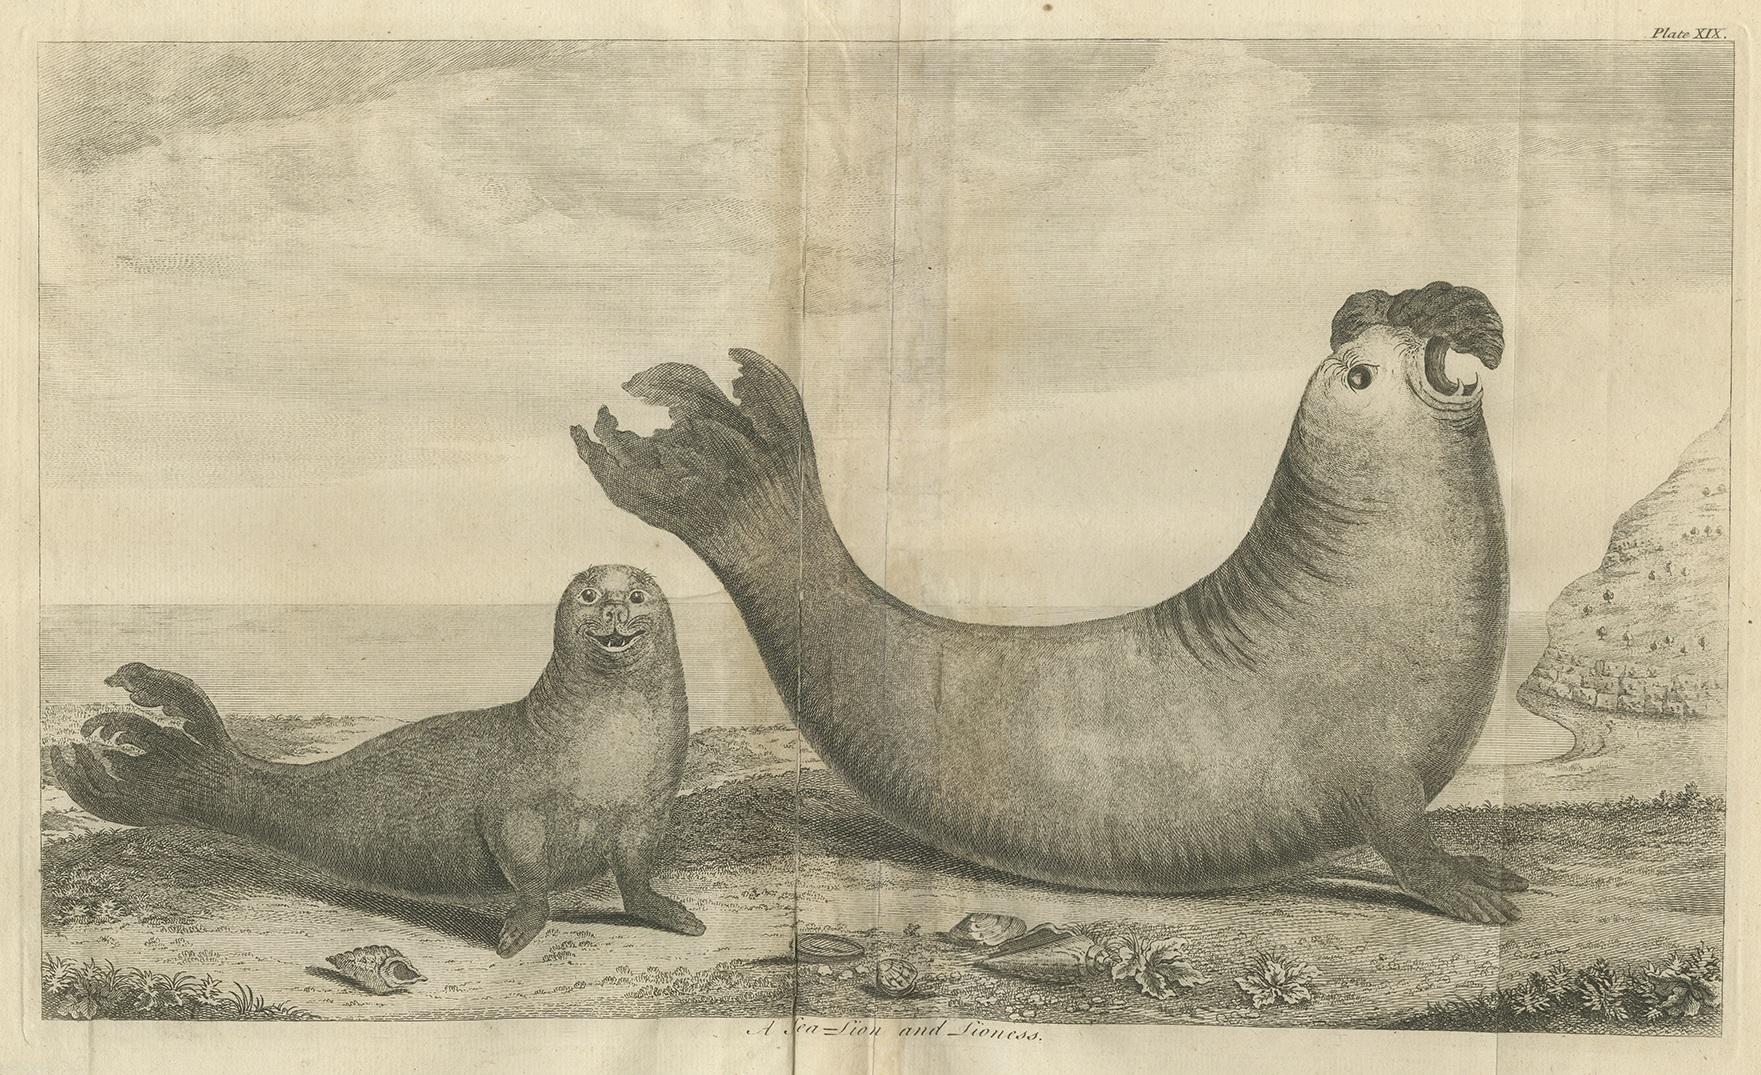 Antique print titled 'A Sea-Lion and Lioness'. Original antique print of two sea lions on the shore of Juan Fernandes Island in the South Pacific Ocean. It was sketched either by Commodore George Anson or one of the crew from his ship, the